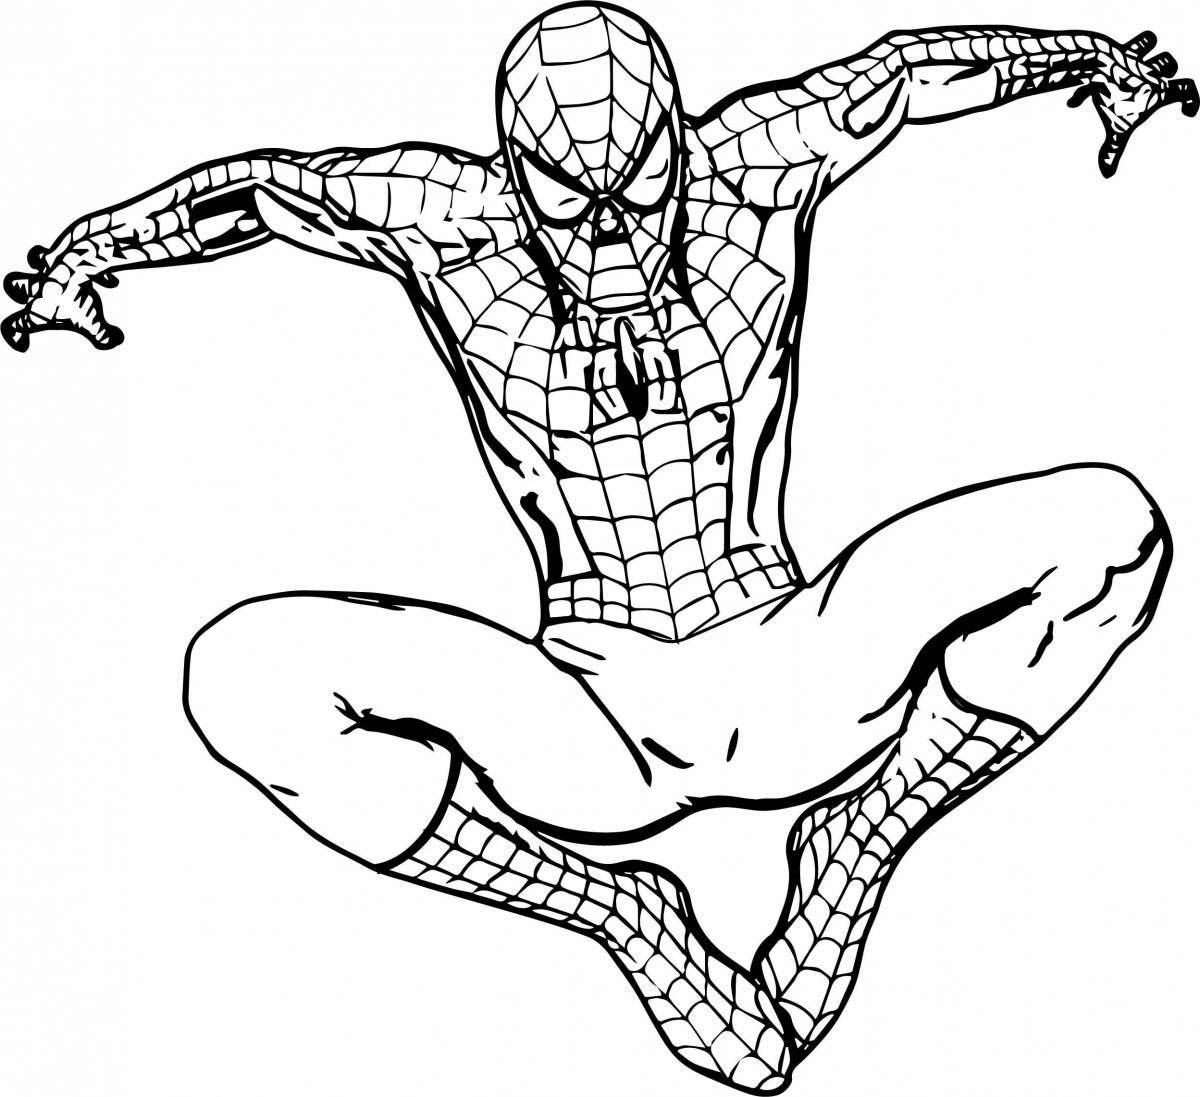 Spiderman's intriguing coloring page